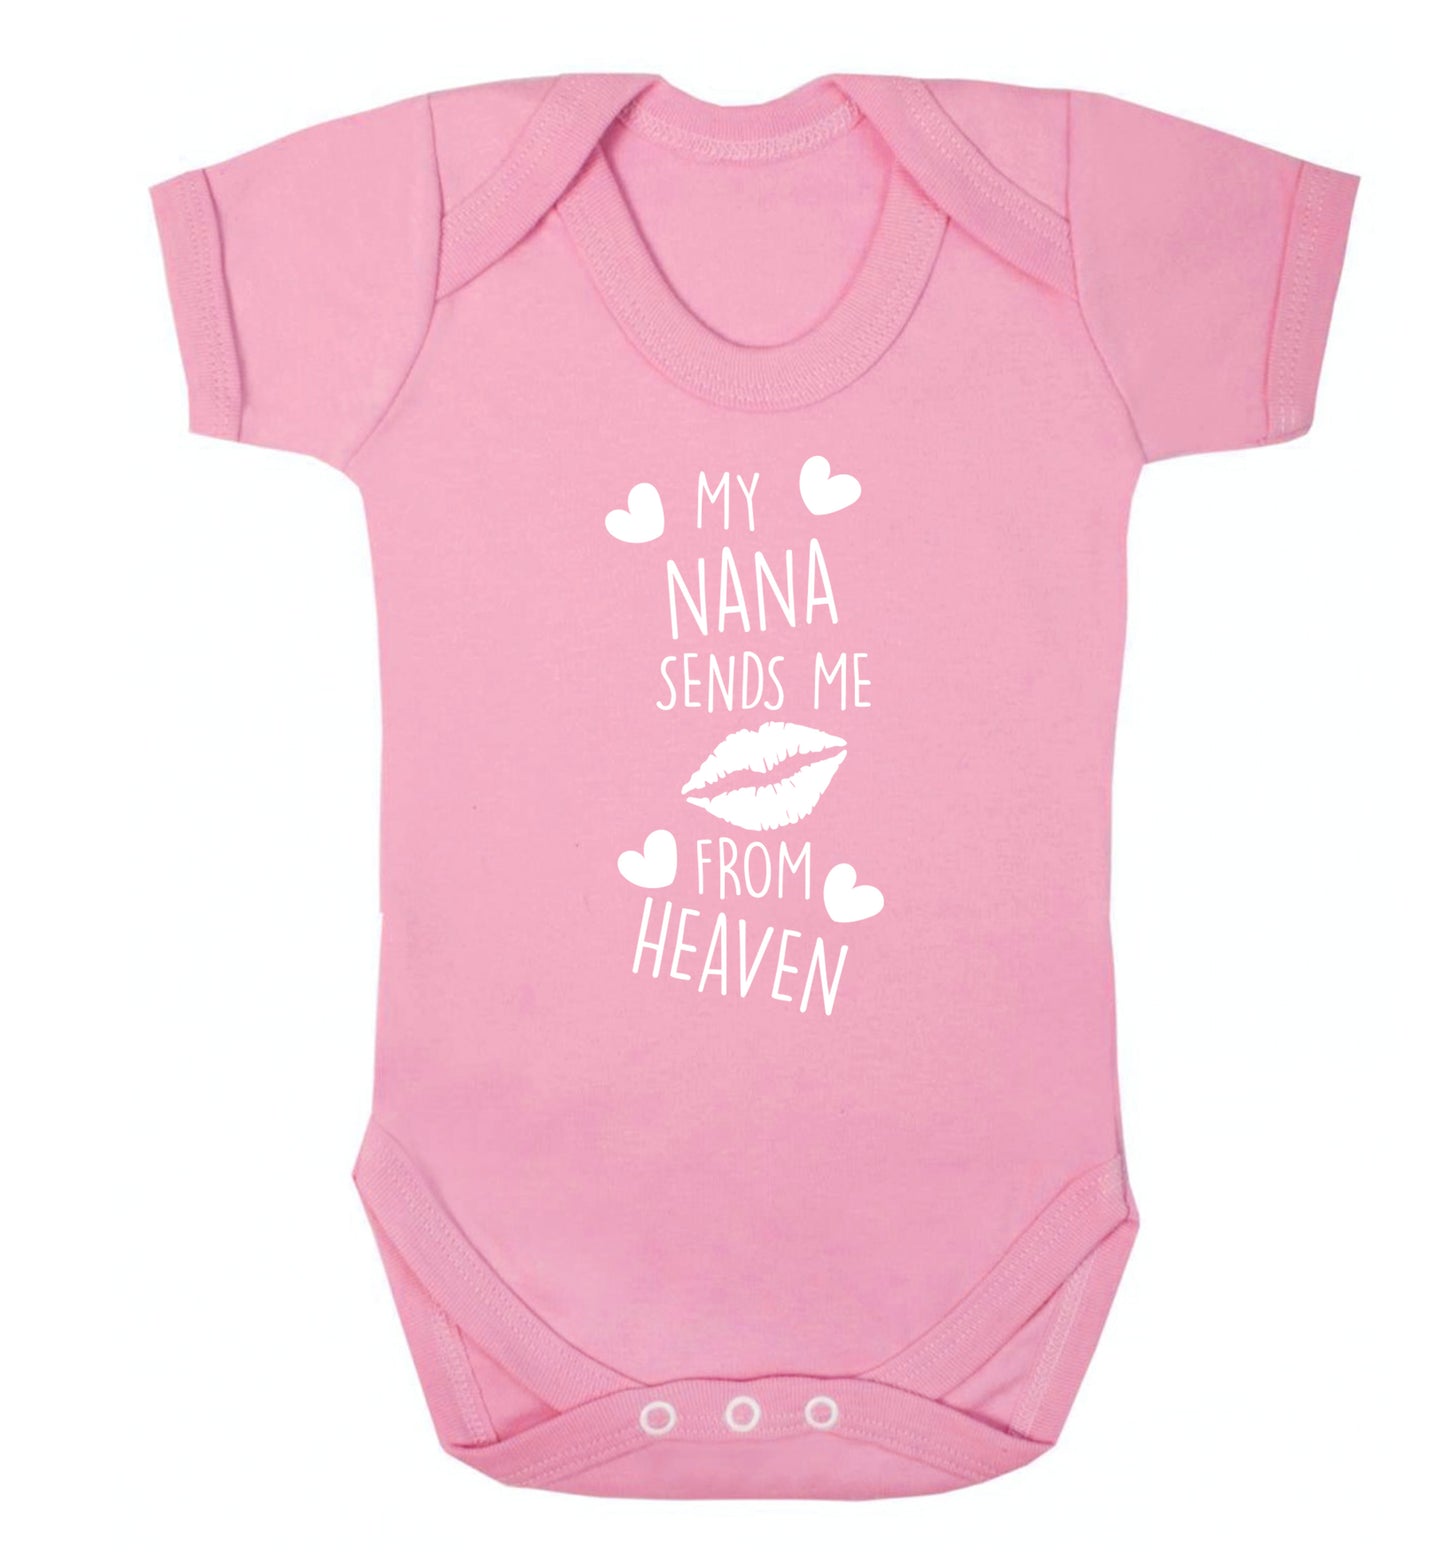 My nana sends me kisses from heaven Baby Vest pale pink 18-24 months